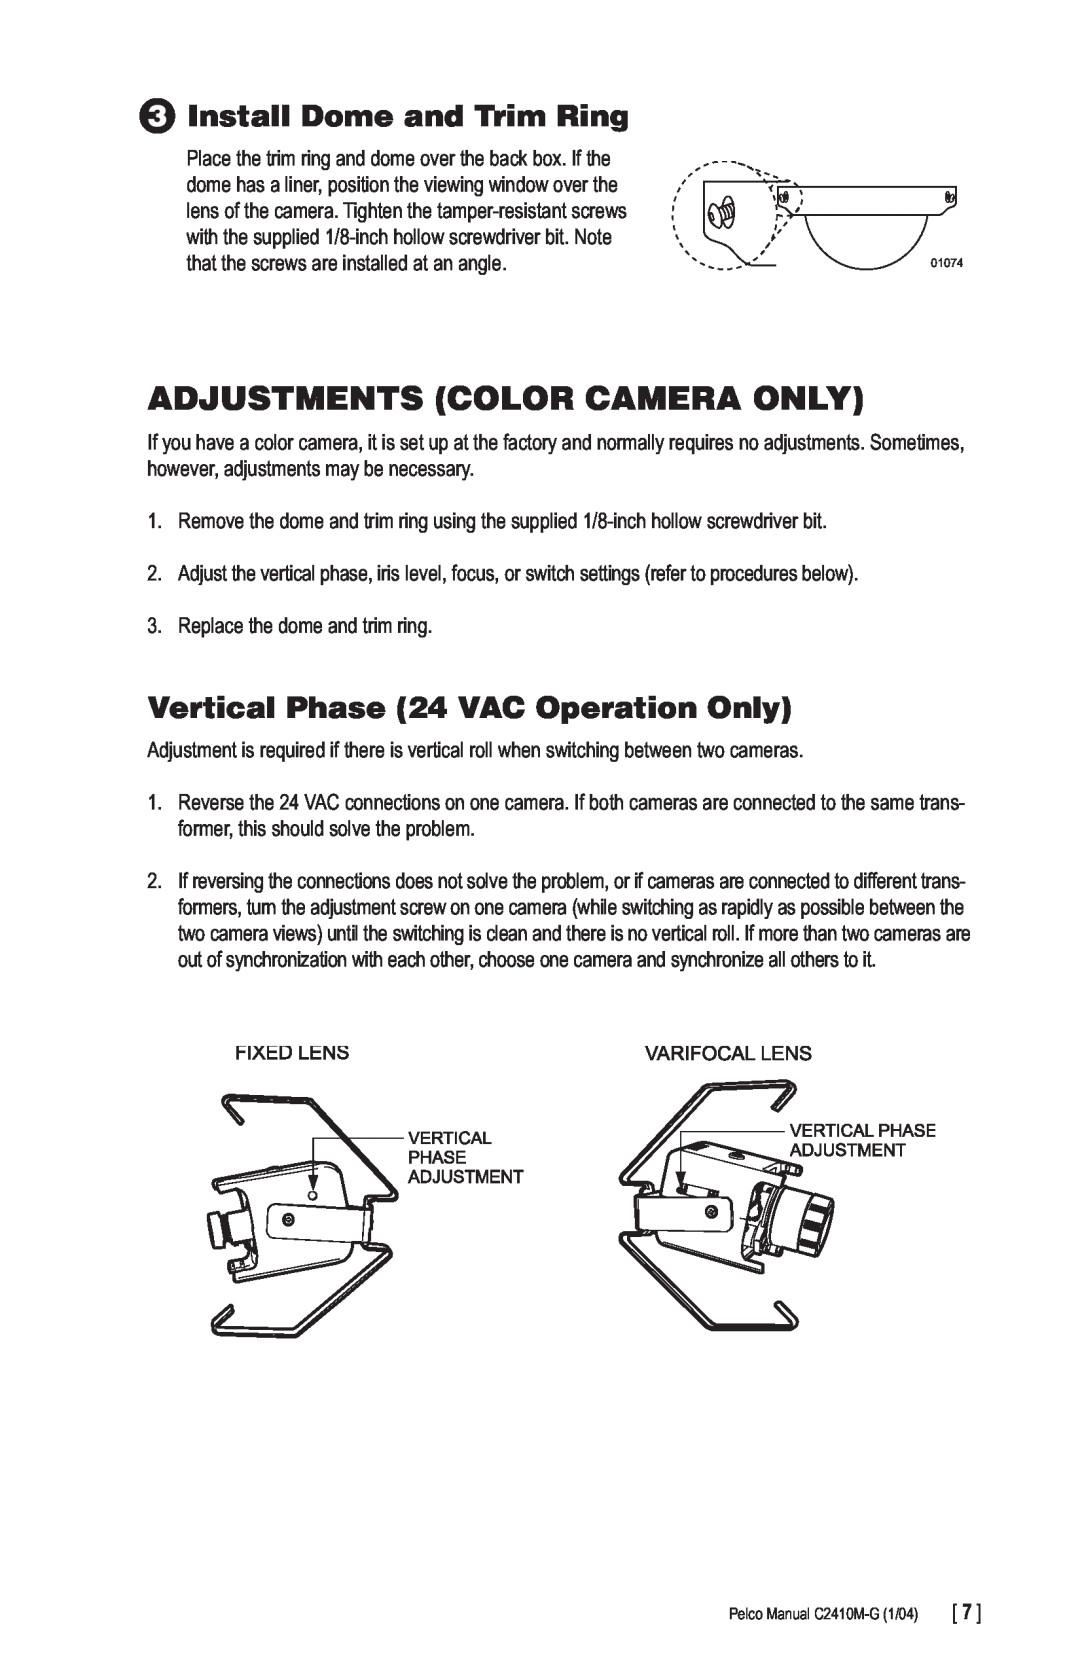 Pelco C2410M-G manual Adjustments Color Camera Only, 3Install Dome and Trim Ring, Vertical Phase 24 VAC Operation Only 